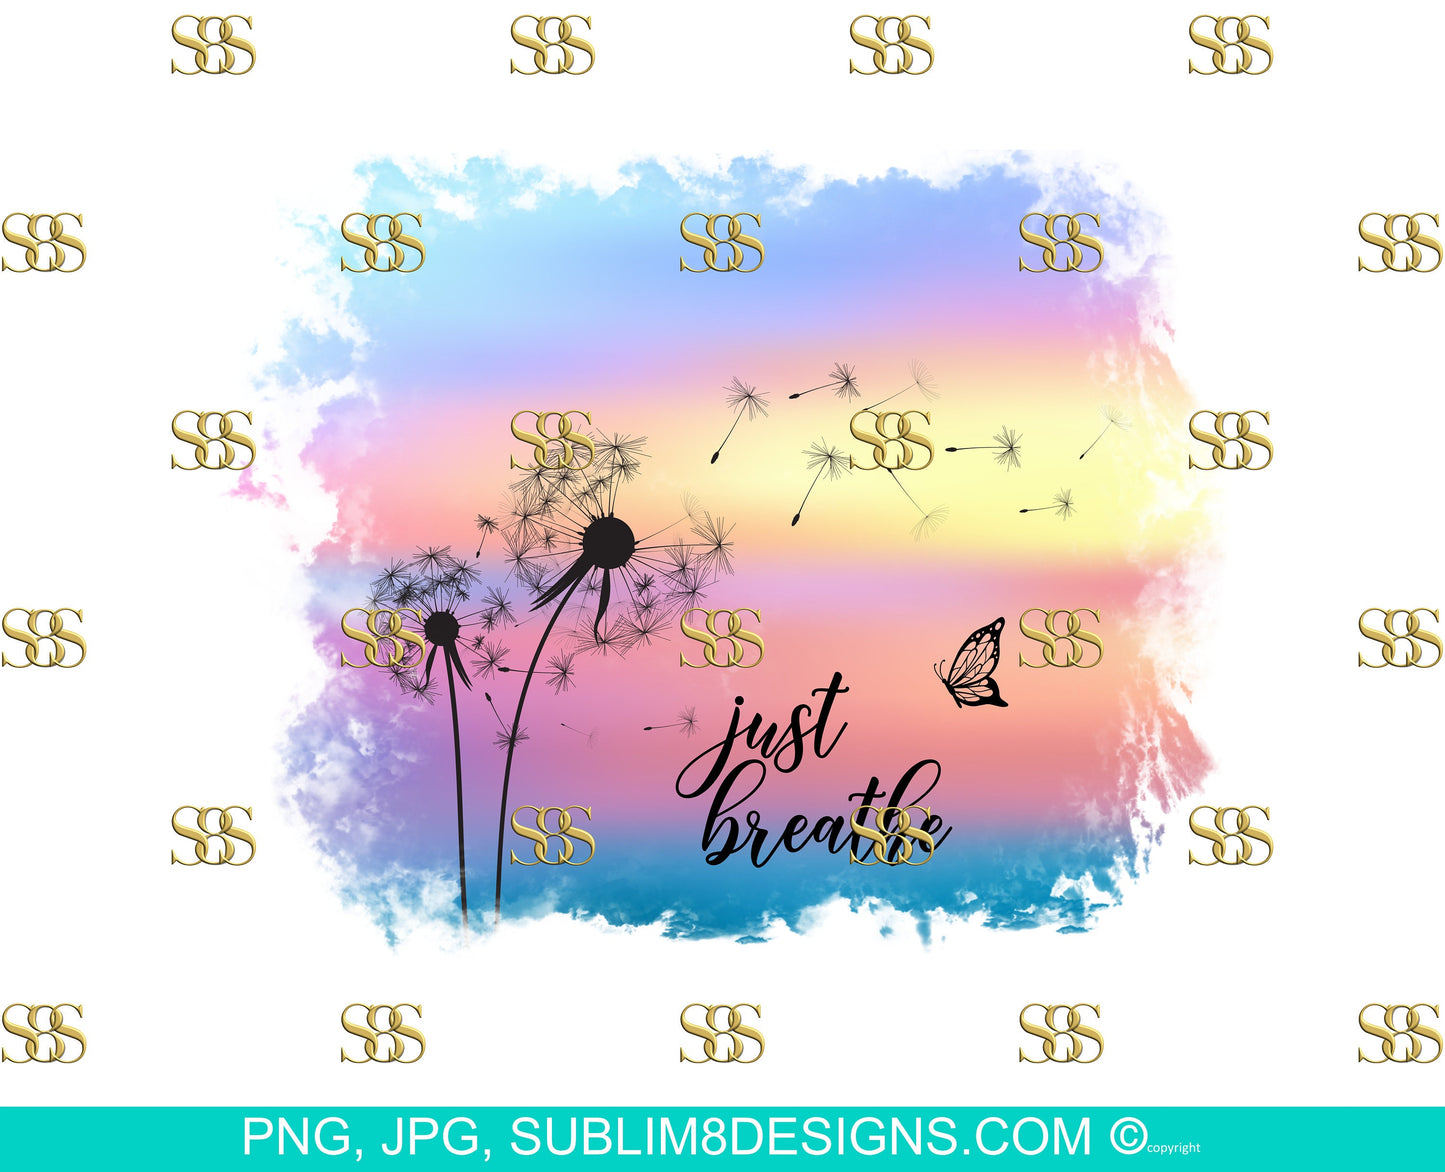 Just Breathe Sunset, Dandelion and Butterfly Sublimation T-shirt Design PNG and JPEG ONLY